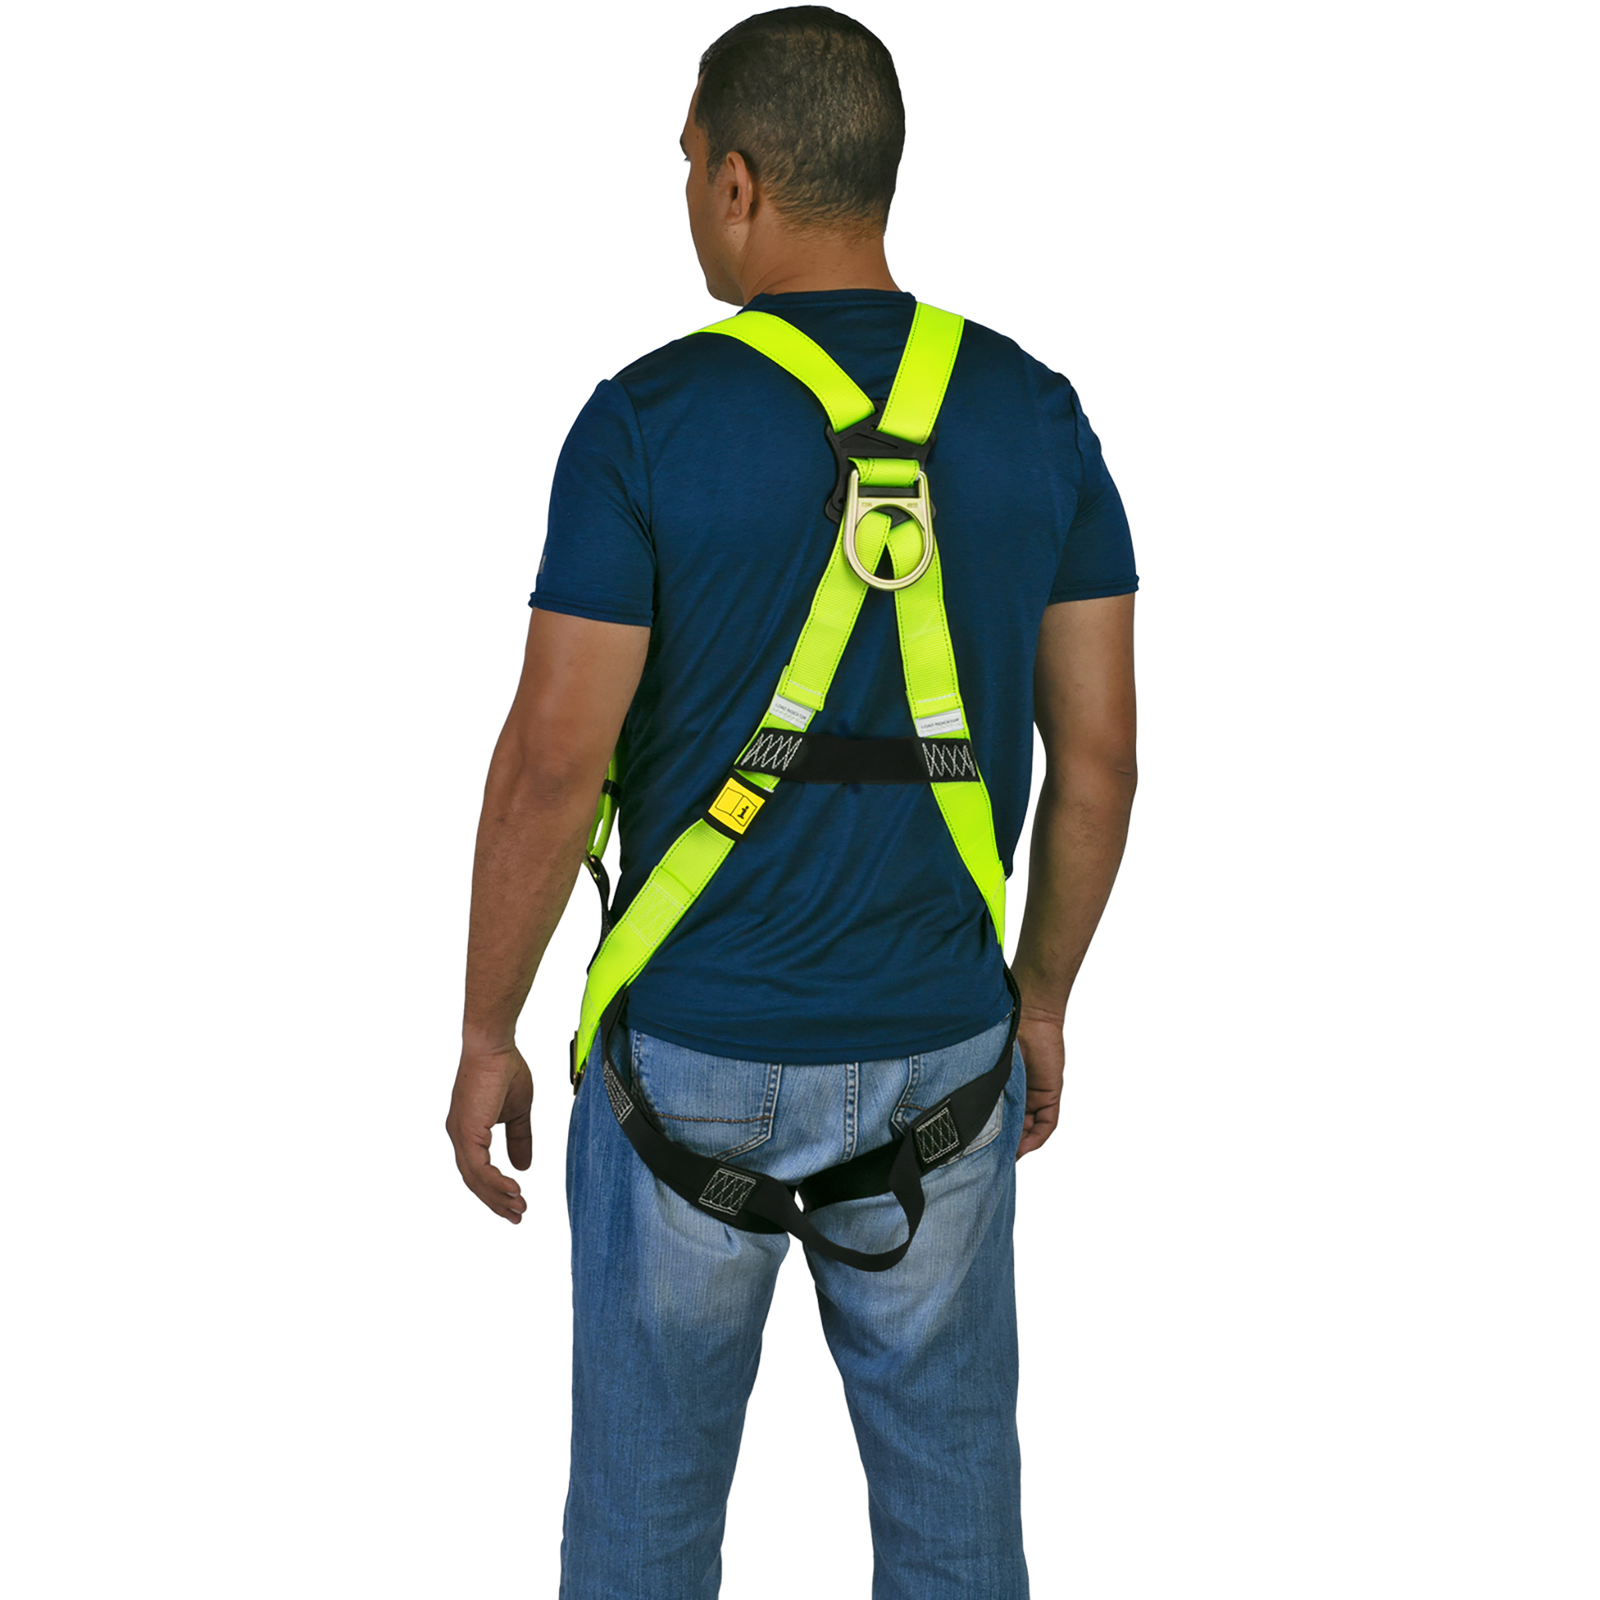 The Purpose of a Safety Harness – Safe Keeper Fall Protection